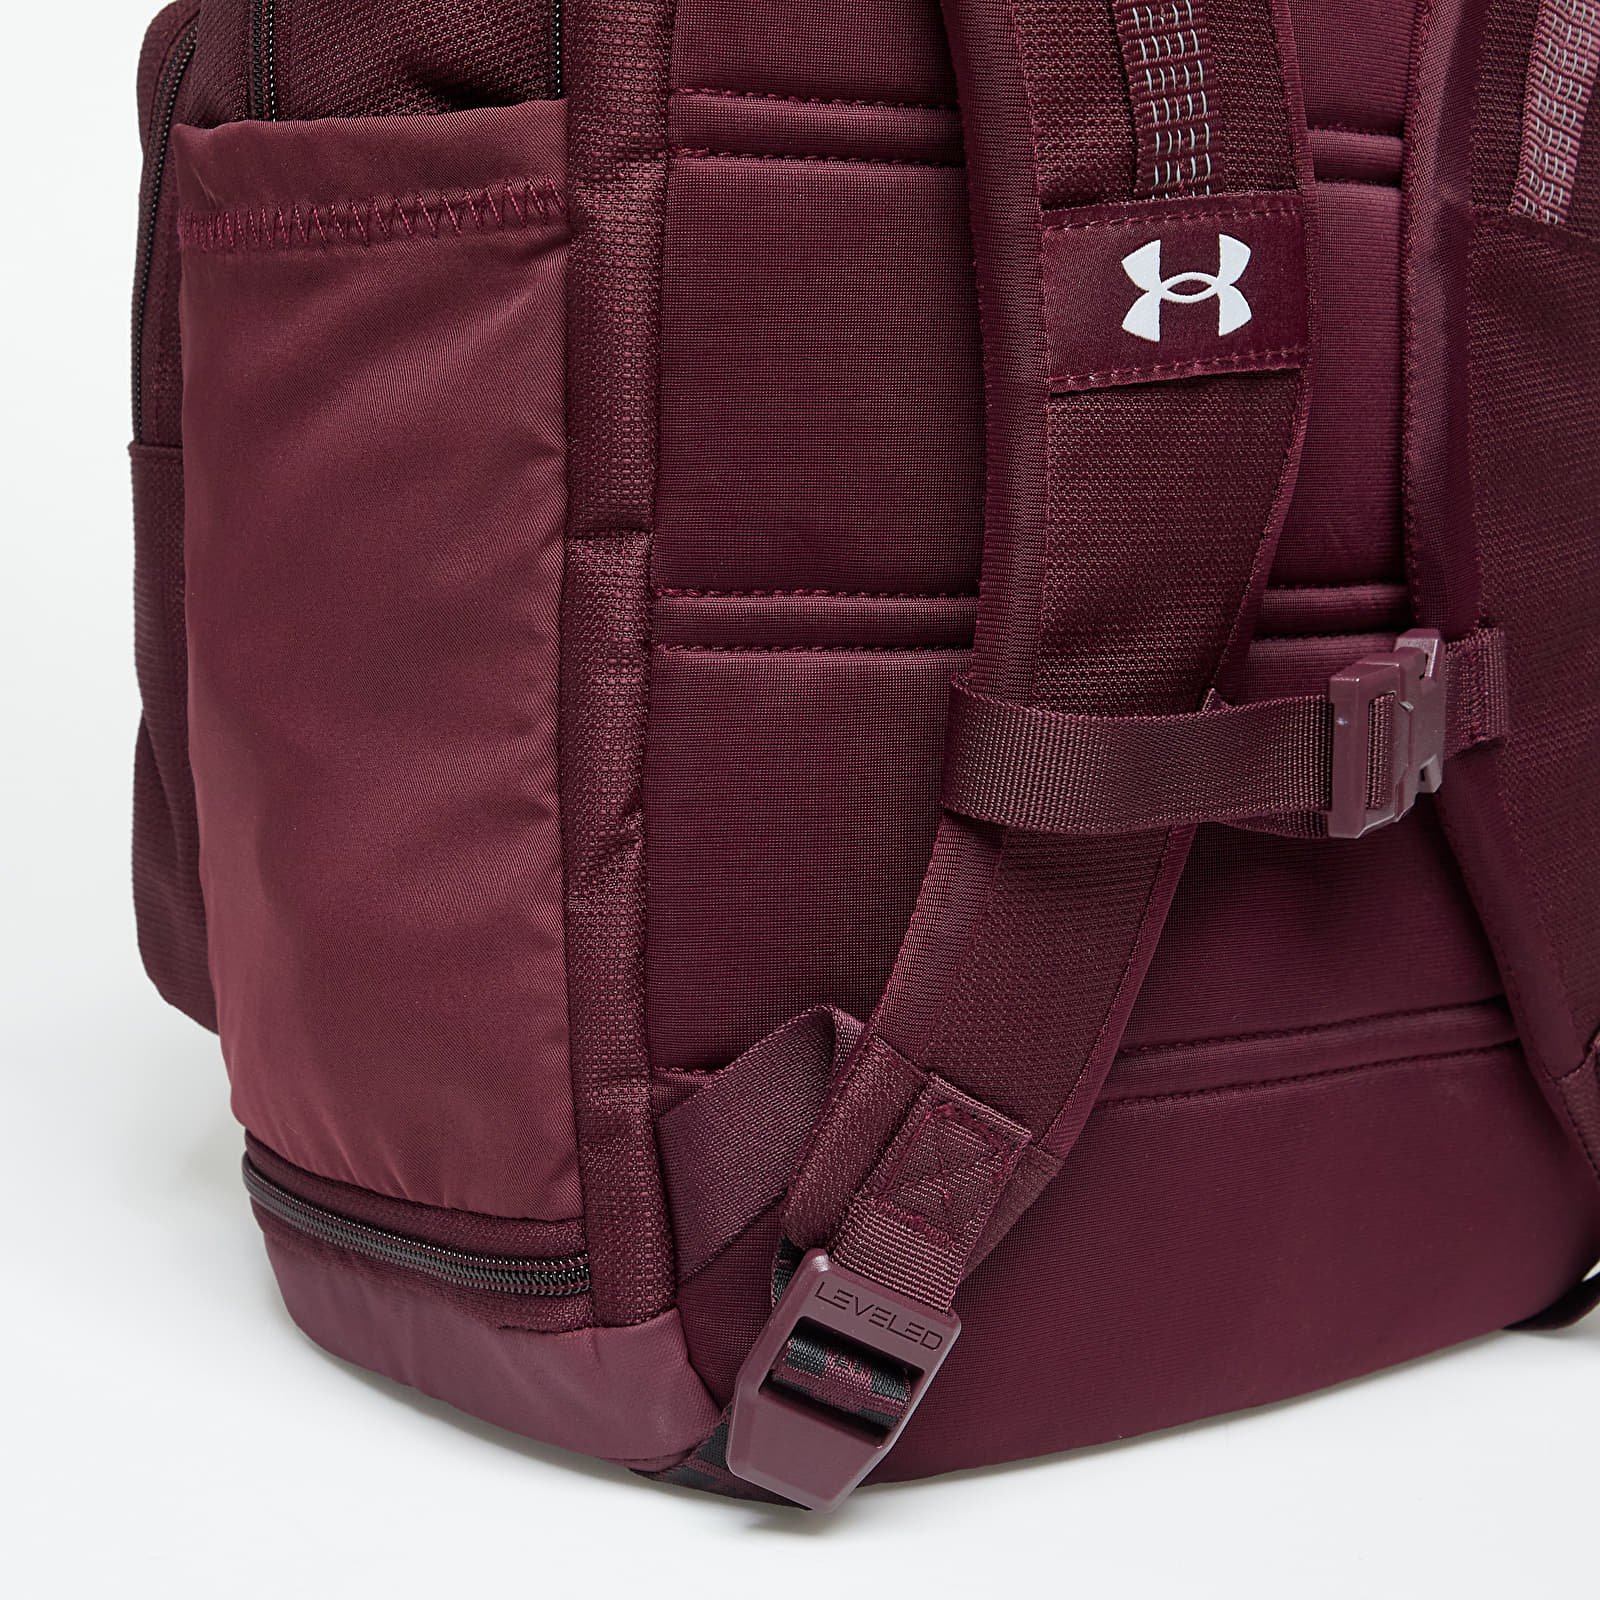 Backpack Under Armour Triumph Sport - Backpacks - Luggage - Equipment